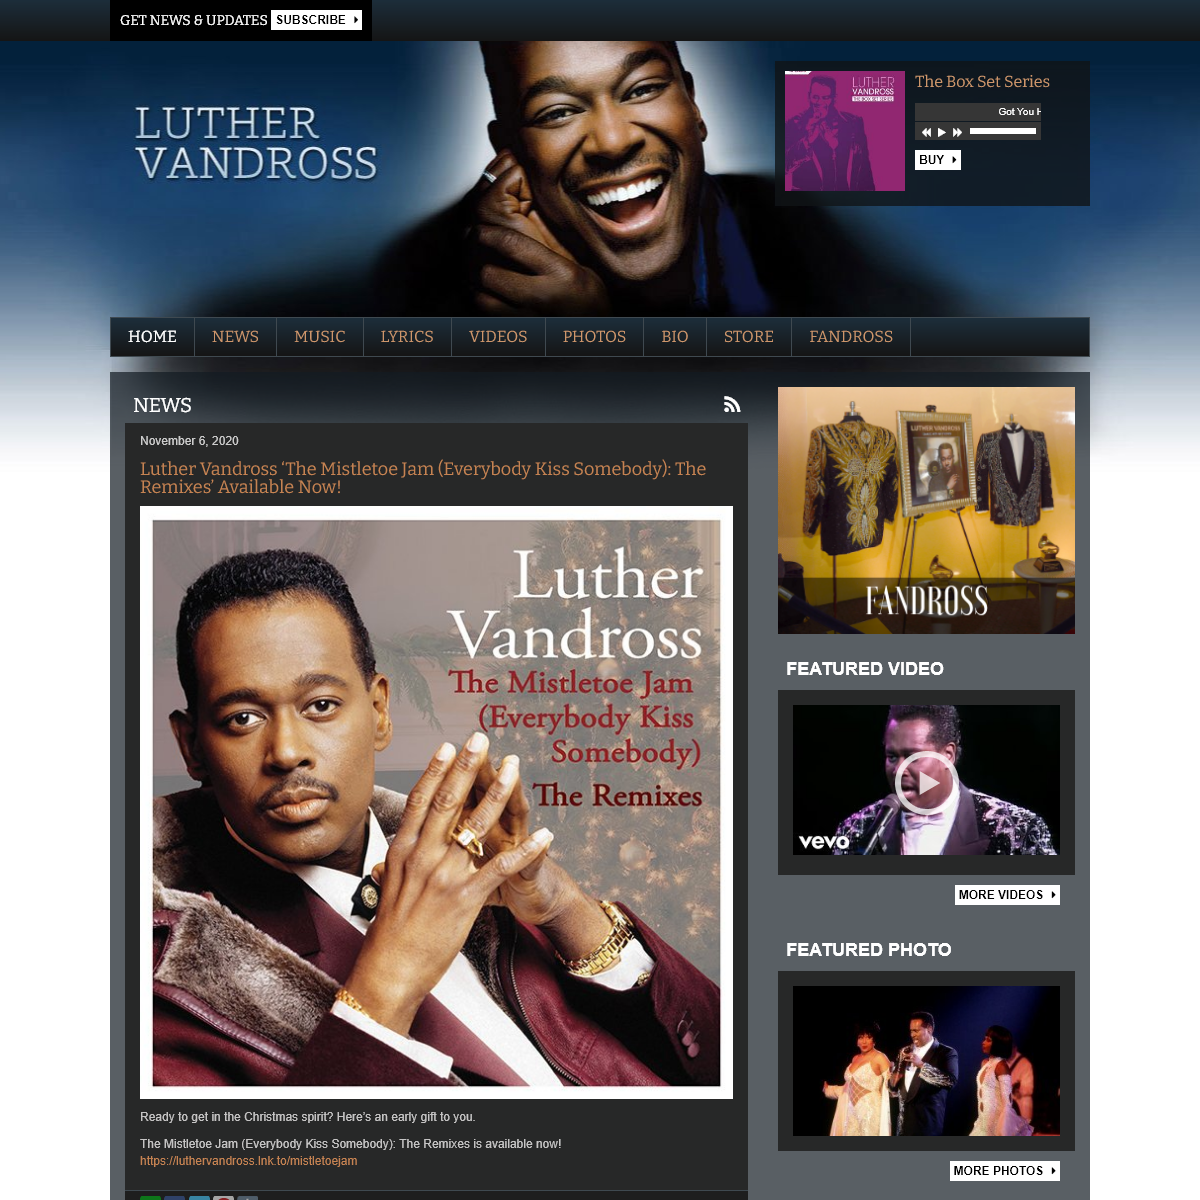 A complete backup of luthervandross.com